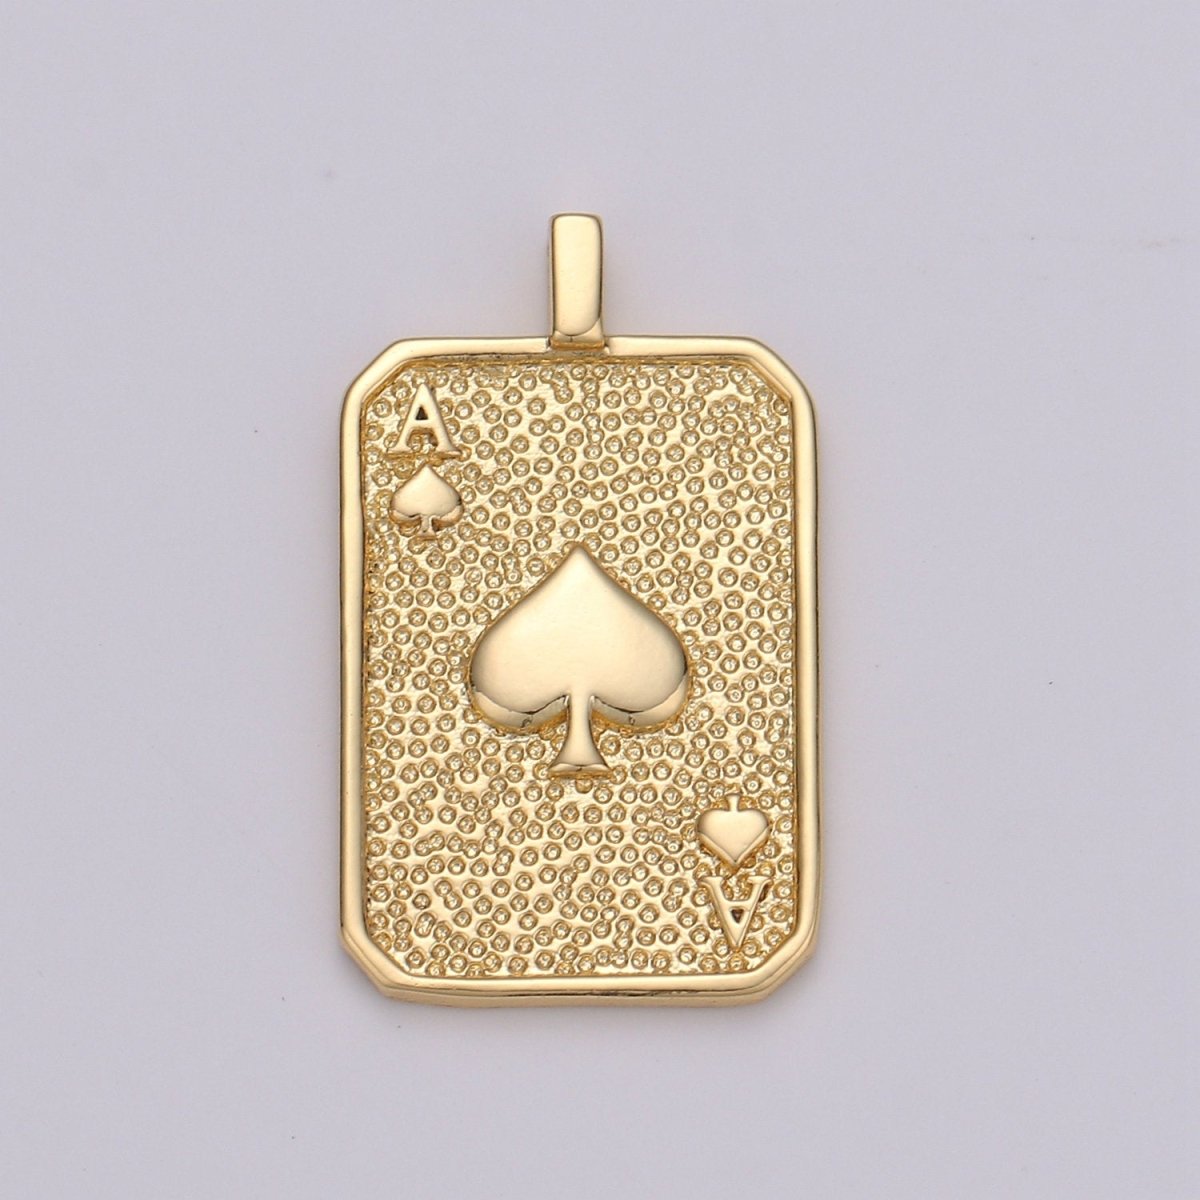 Gold Tag Ace of Spade Charm Gold Filled Medallion, Ace of Heart Pendant Necklace Charm for Vegas Inspired Necklace Supply J-029 J-030 - DLUXCA